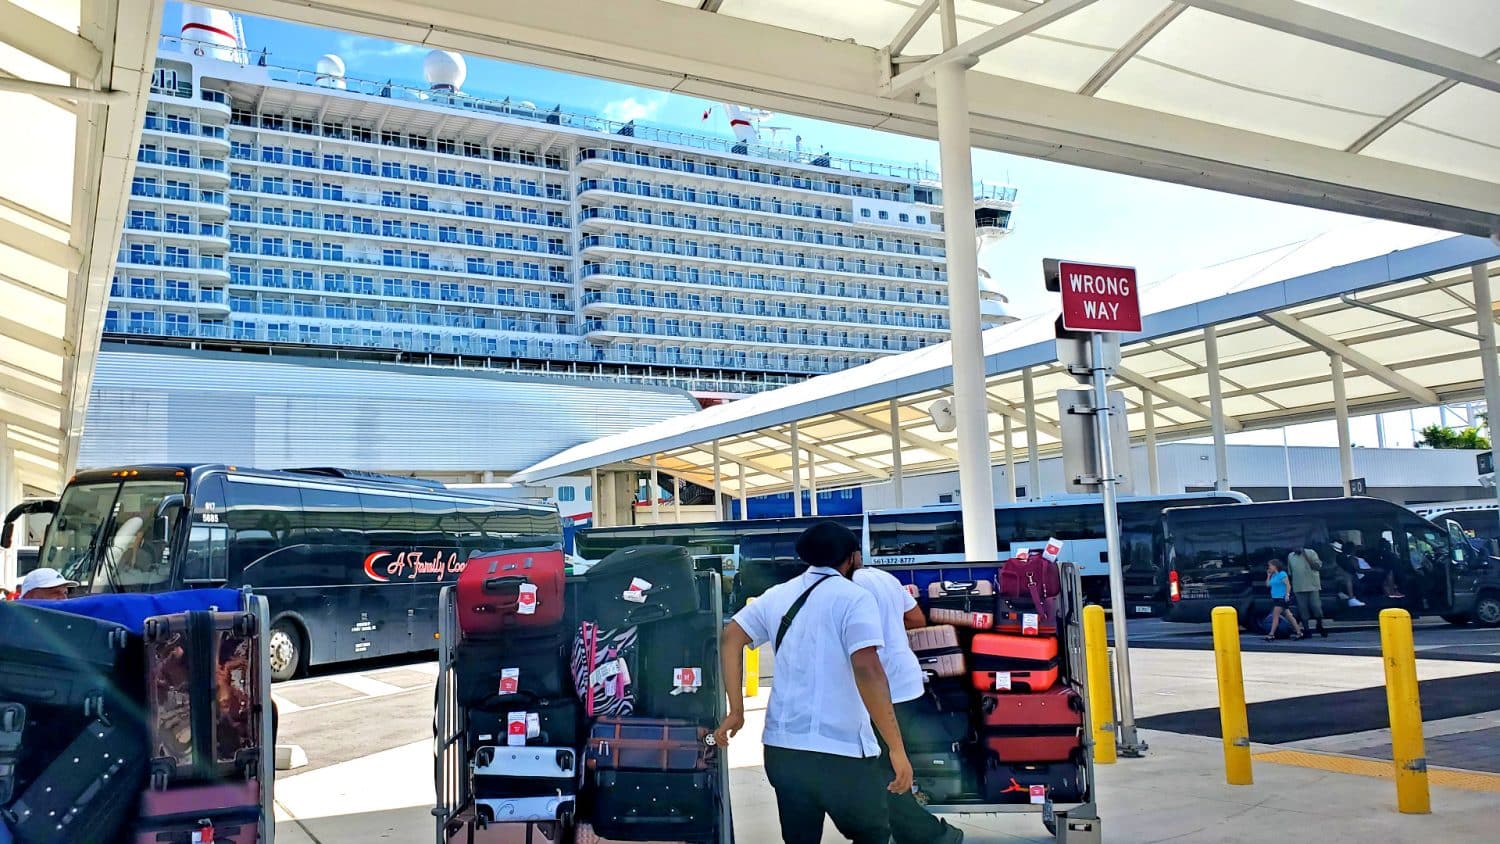 luggage on a cruise with porters with cruise ship in background in PortMiami